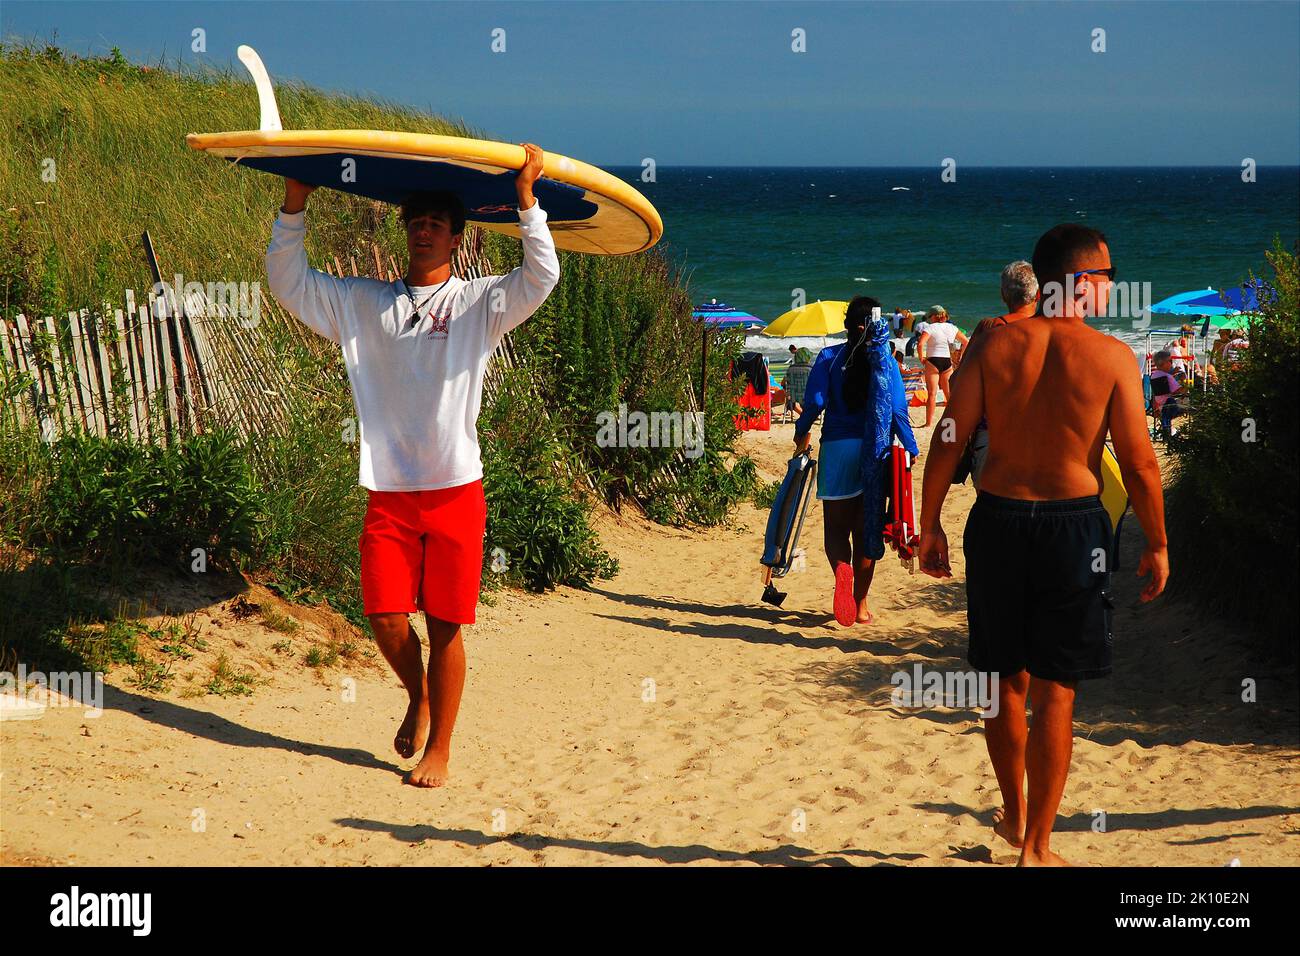 A lifeguard, working a summer job, carries a surfboard from the lifeguard stand through a path in the dunes at Ditch Plains Beach in Montauk, Stock Photo